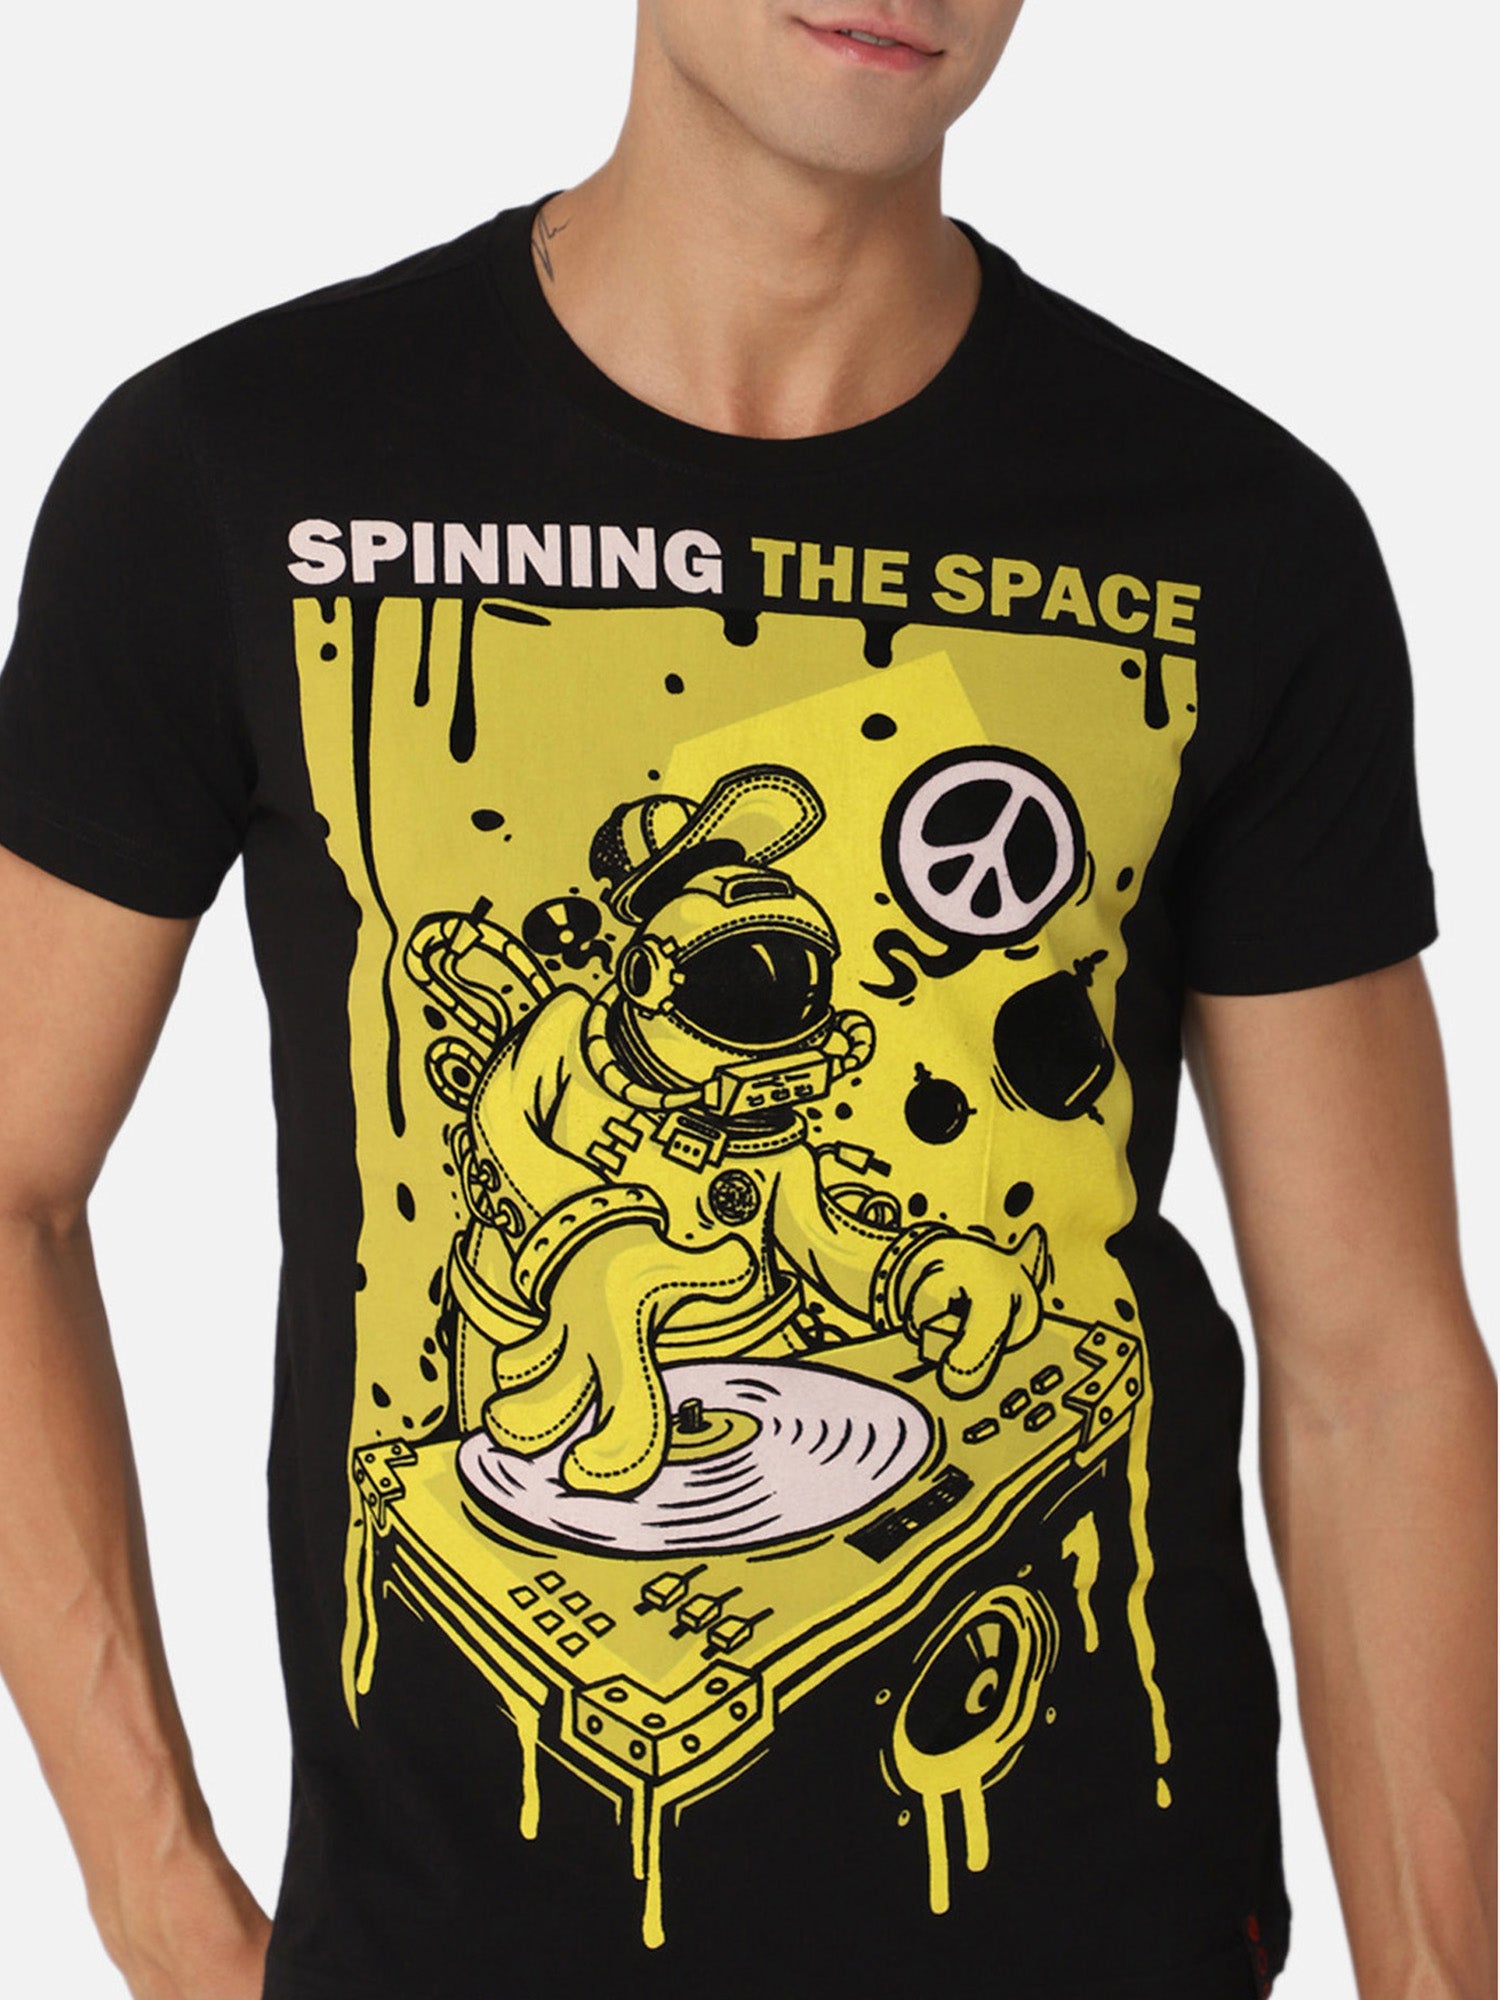 Punk SPINNING-THE-SPACE Black Tshirt